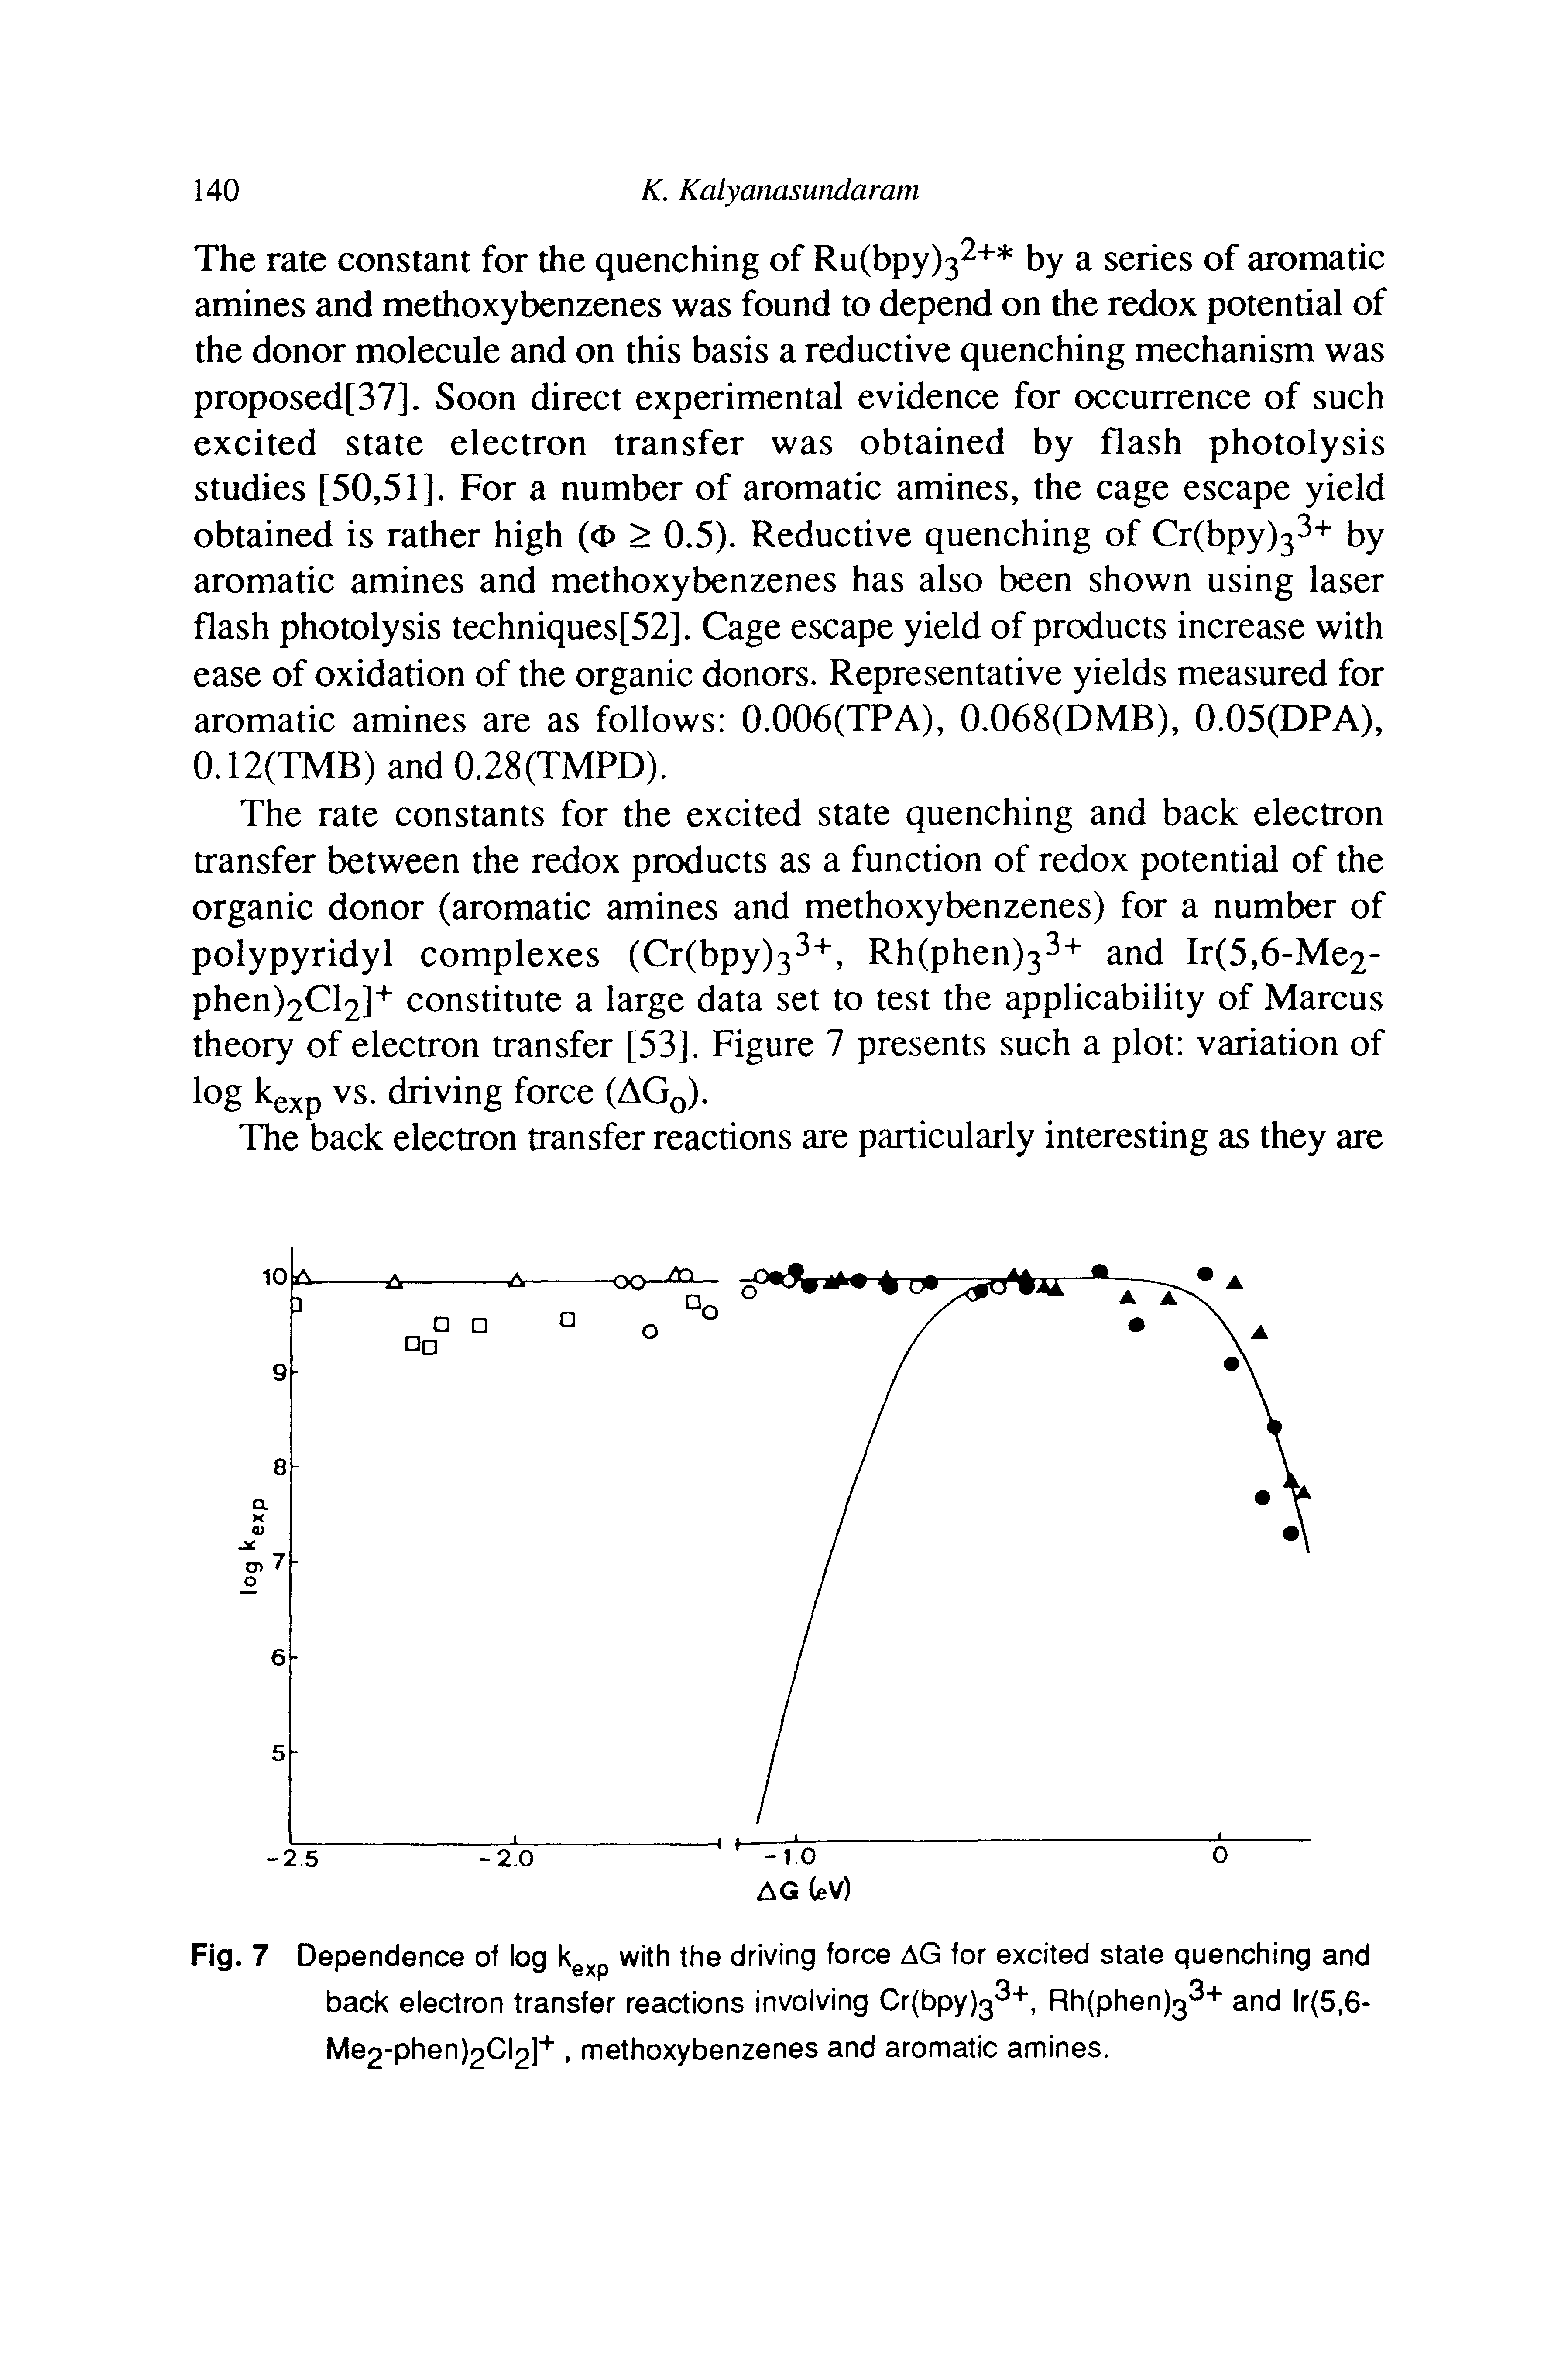 Fig. 7 Dependence of log with the driving force AG for excited state quenching and back electron transfer reactions involving Cr(bpy)3 , Rh(phen)3 and lr(5,6-Me2-phen)2Cl2], methoxybenzenes and aromatic amines.